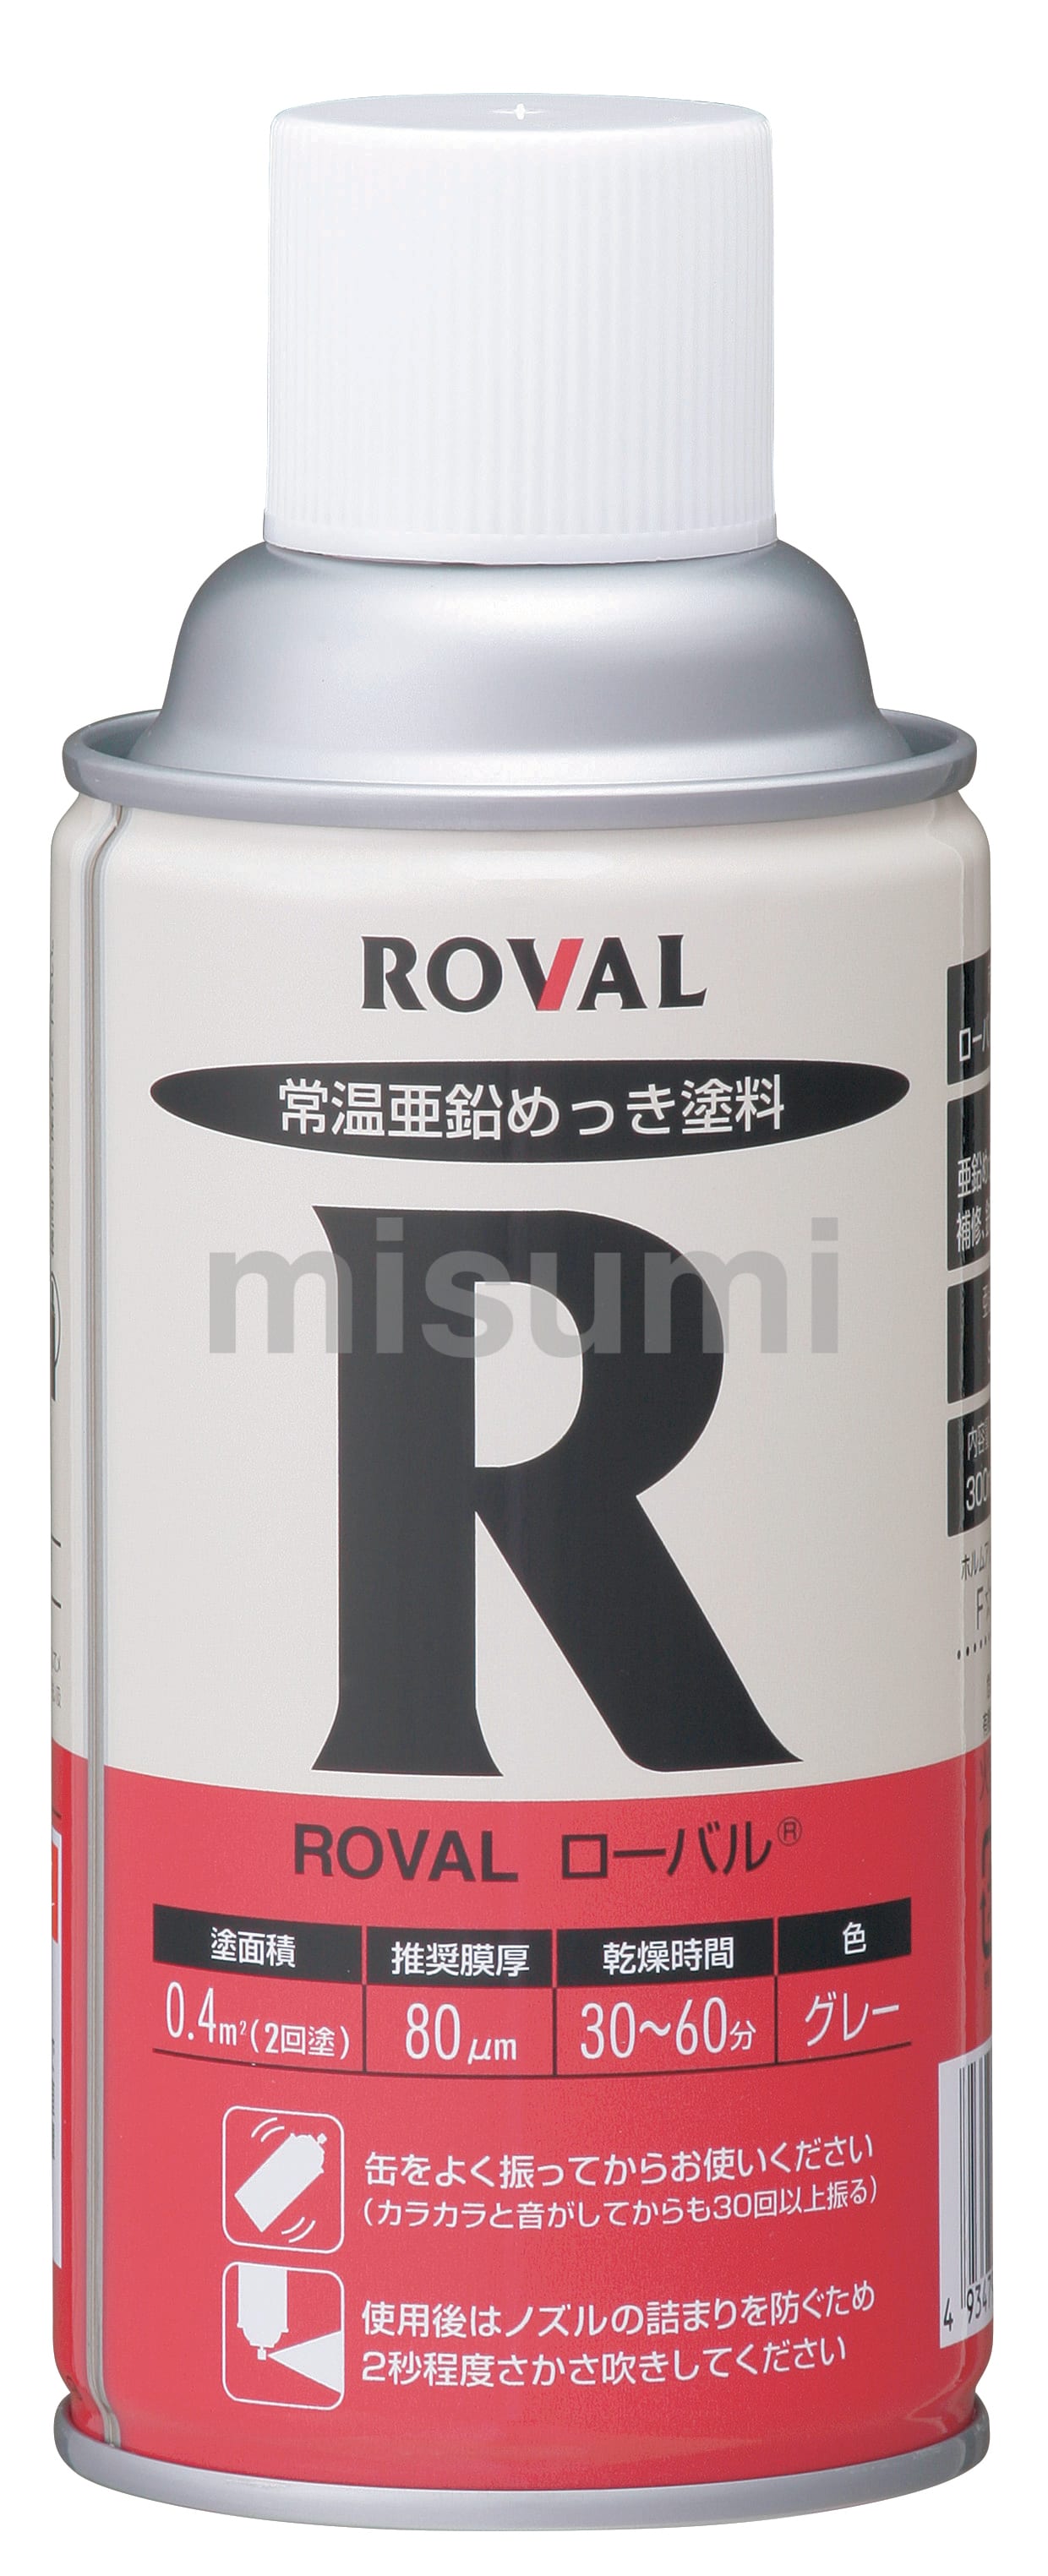 ROVAL エポキシ常温亜鉛メッキ エポ ローバル ER-5KG 5kg - 1